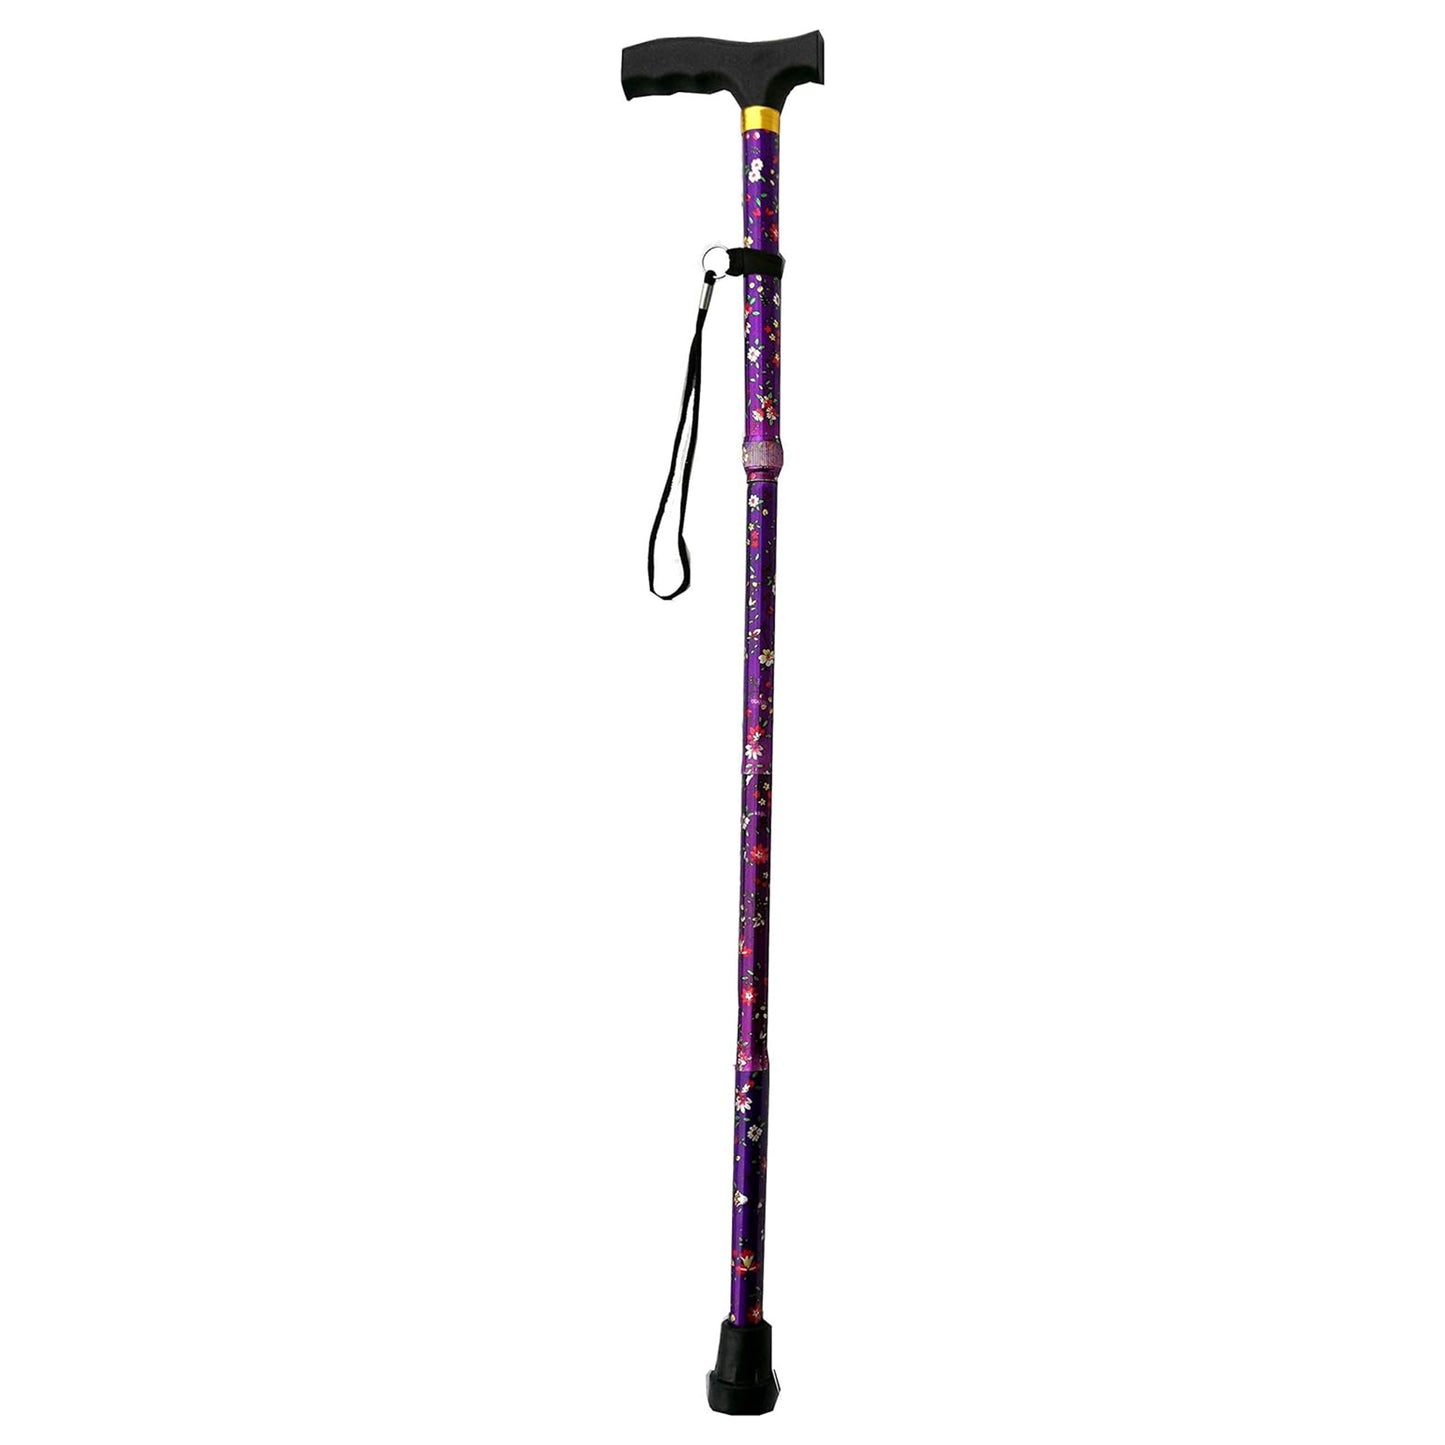 Deluxe Folding Compact 4-part Ladies Walking Stick, Stunning Floral Print with a Unique Ergonomic Easy-Grip Moulded Handle and Adjustable Height Walking Cane for Women - 32.5” – 37”